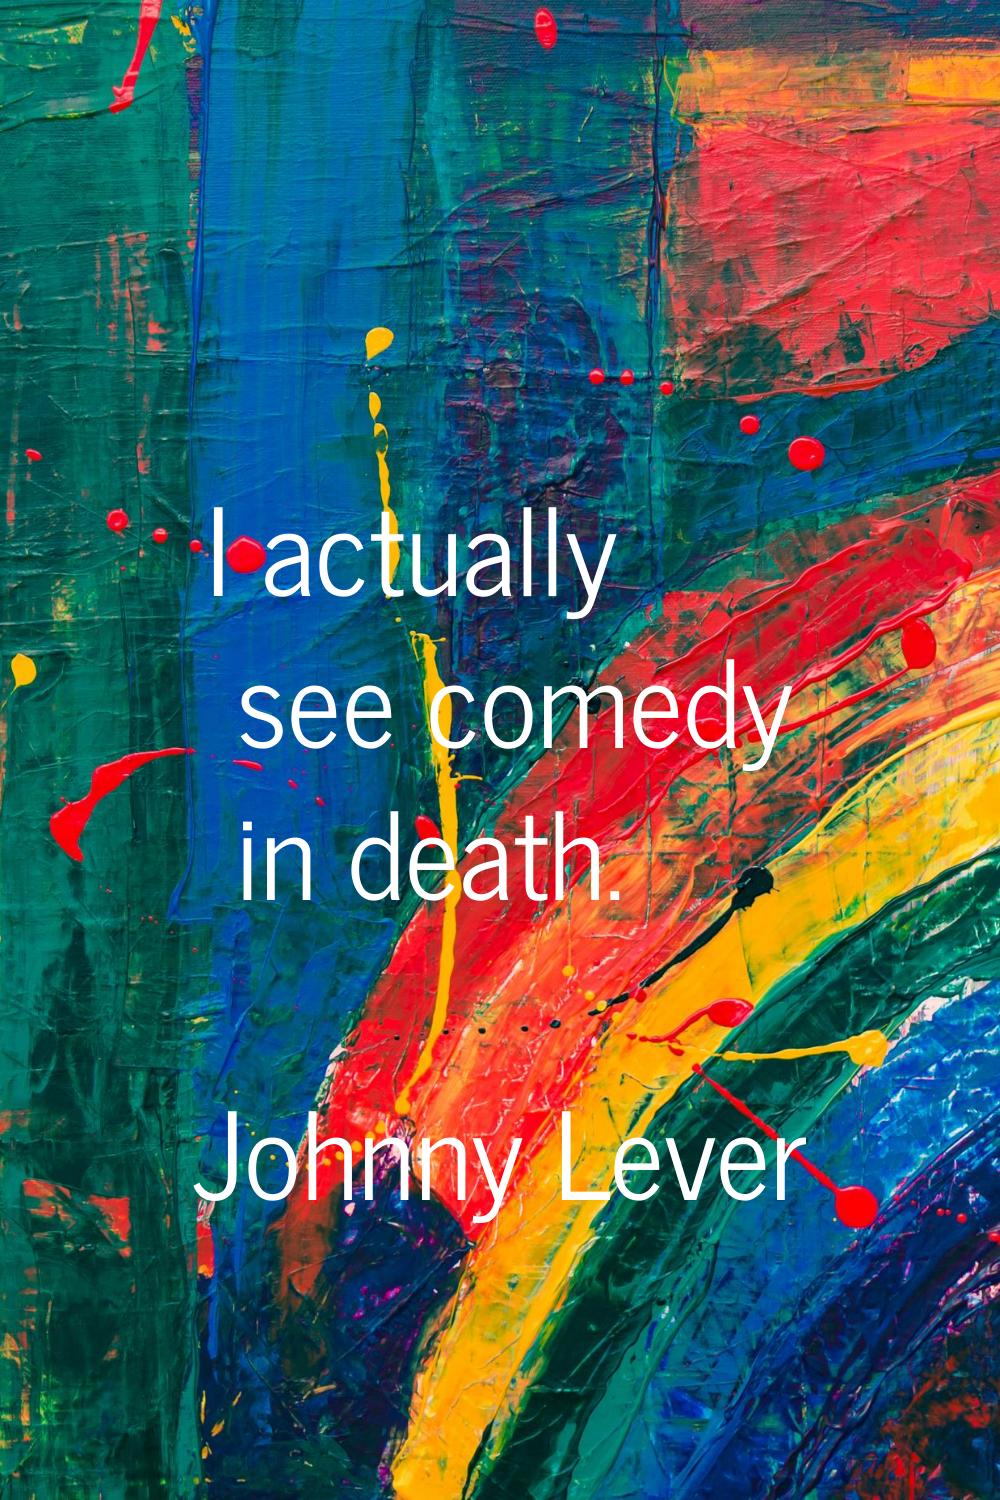 I actually see comedy in death.